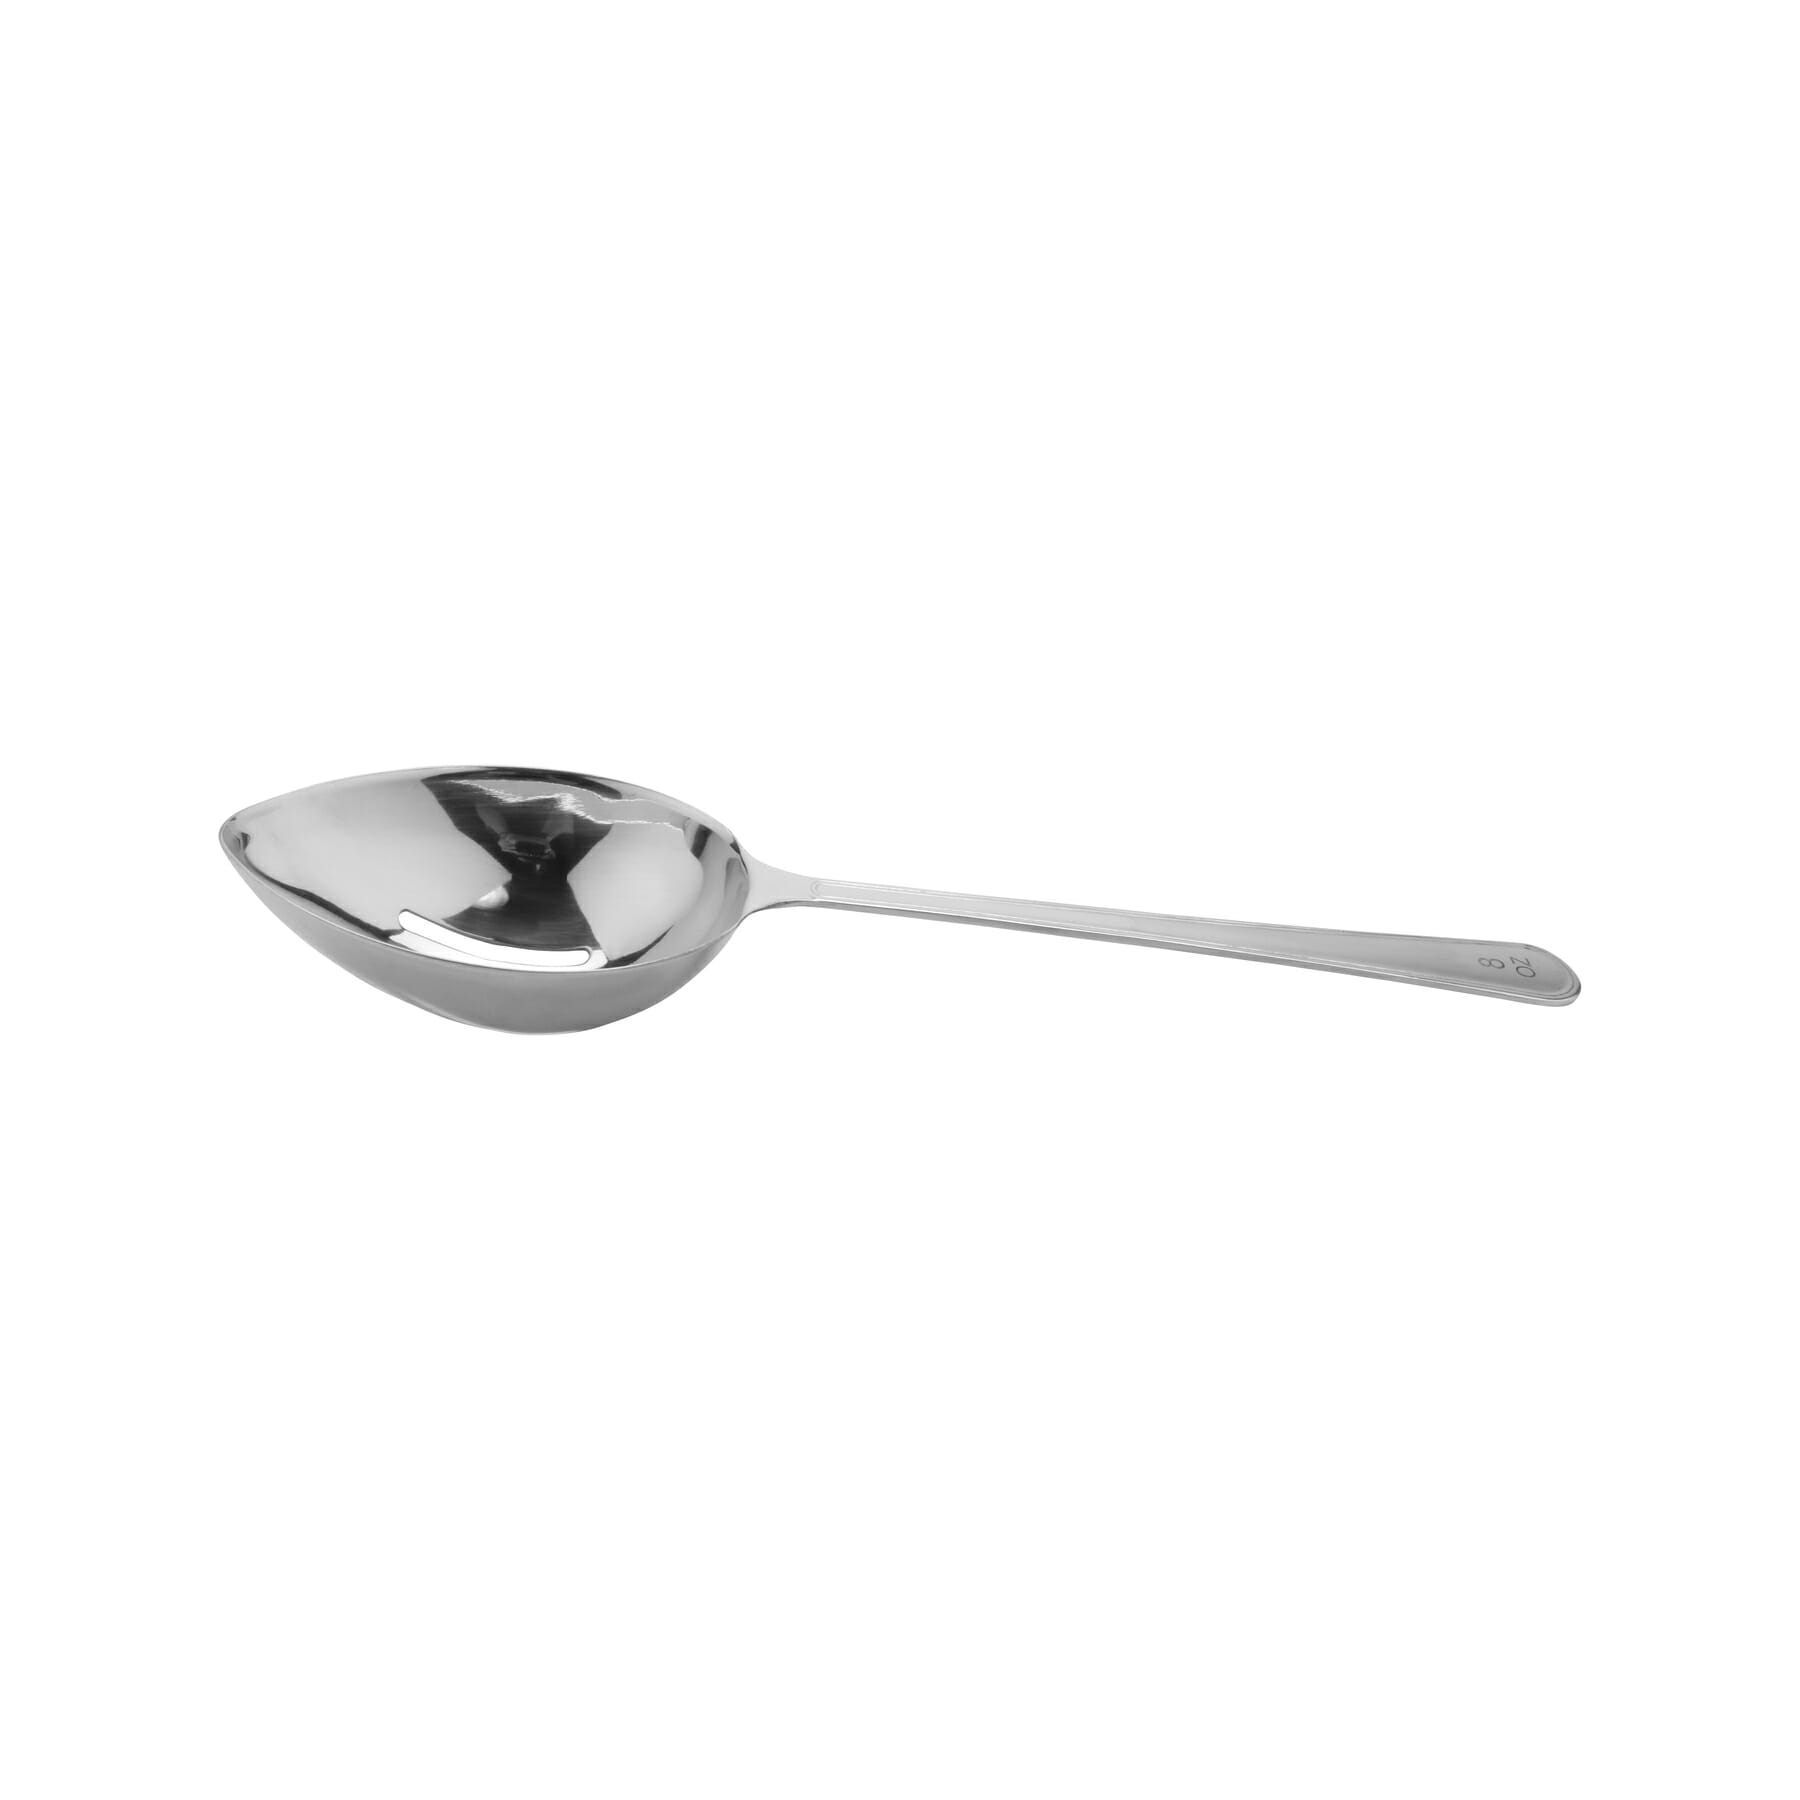 8 oz., 12" Portion Control Slotted Spoon